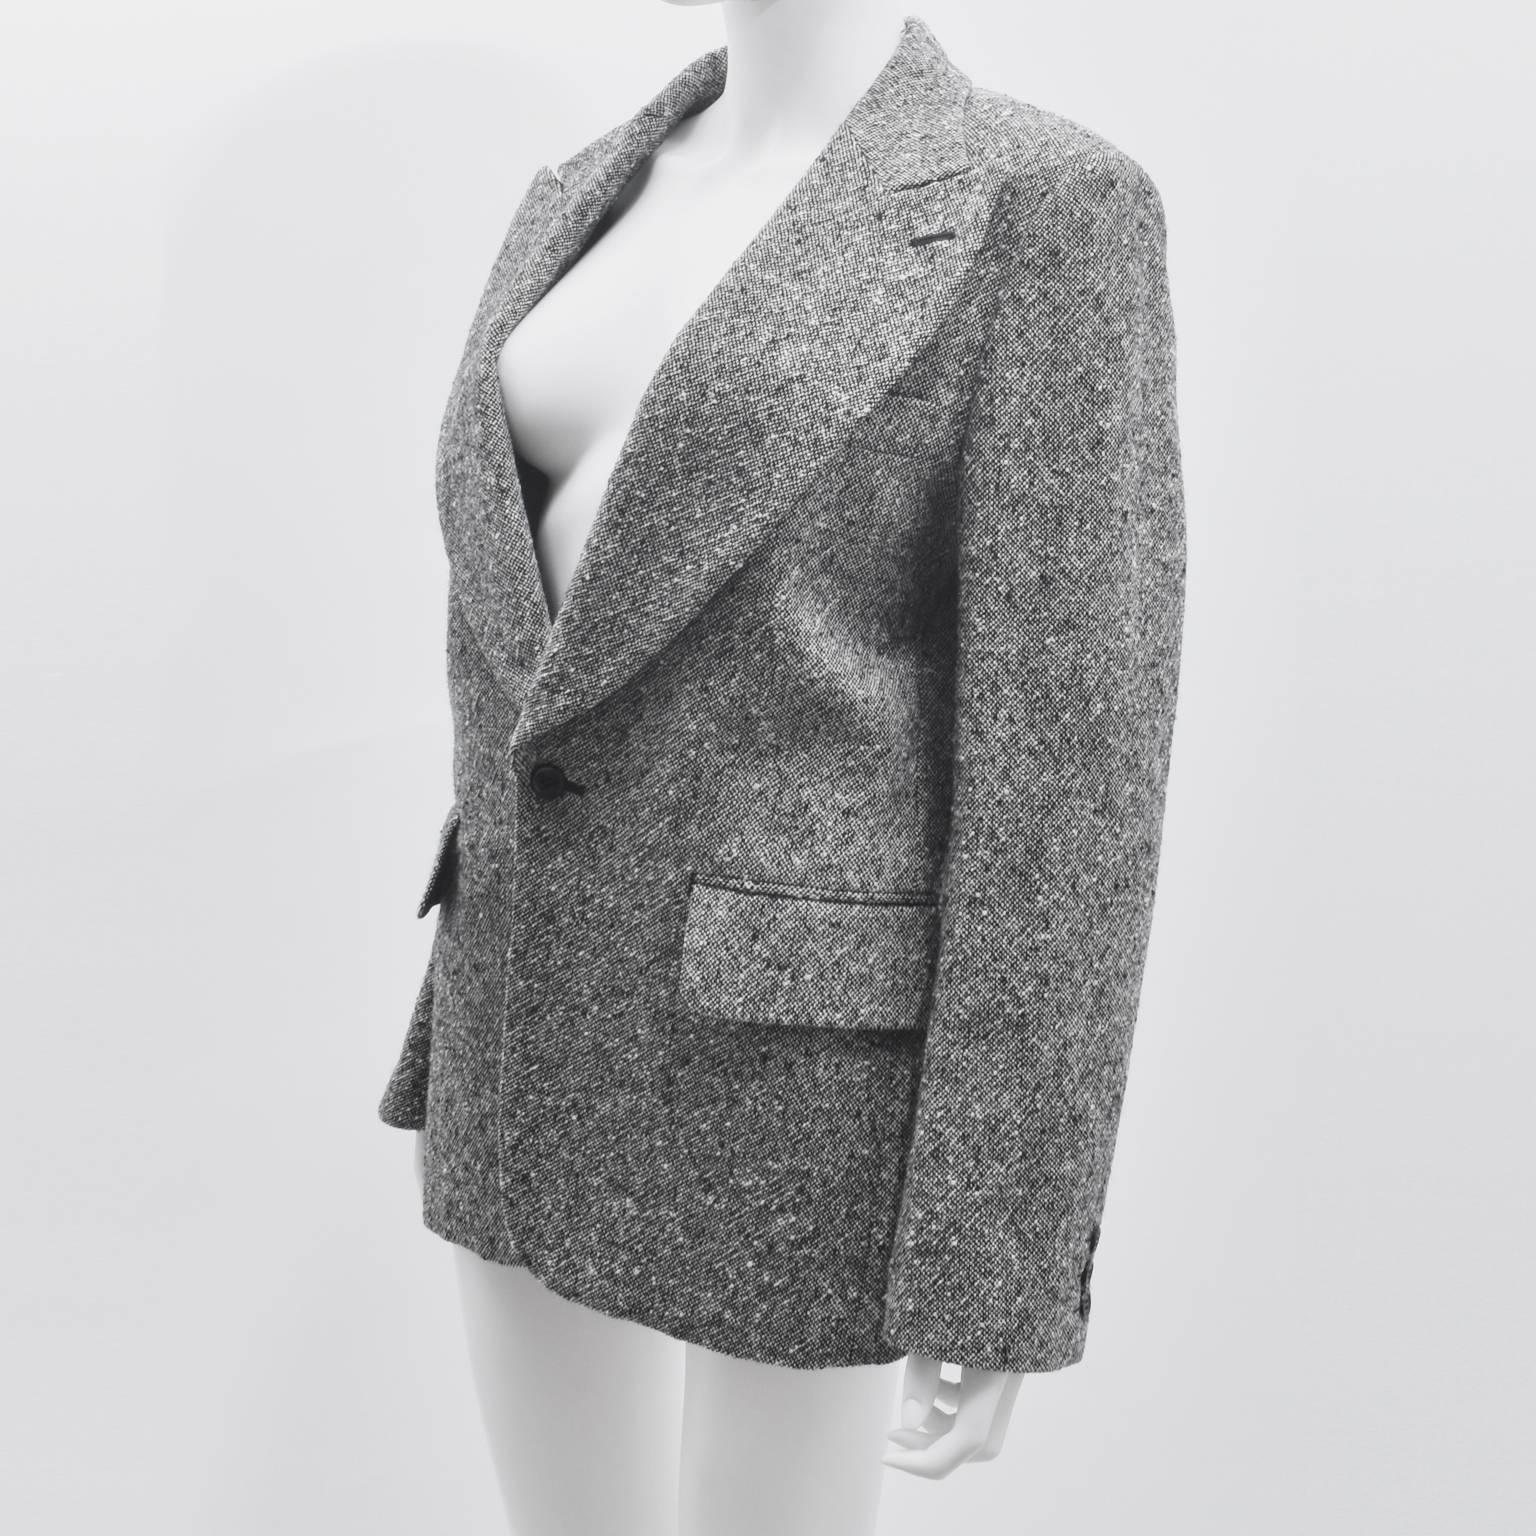 A Comme des Garcons grey and white wool tweed sports jacket from 2001. The jacket has a boxy, straight cut in a relaxed sports jacket style. It is made from a wool and nylon blend of grey and white creating a woven, textured material. The jacket is